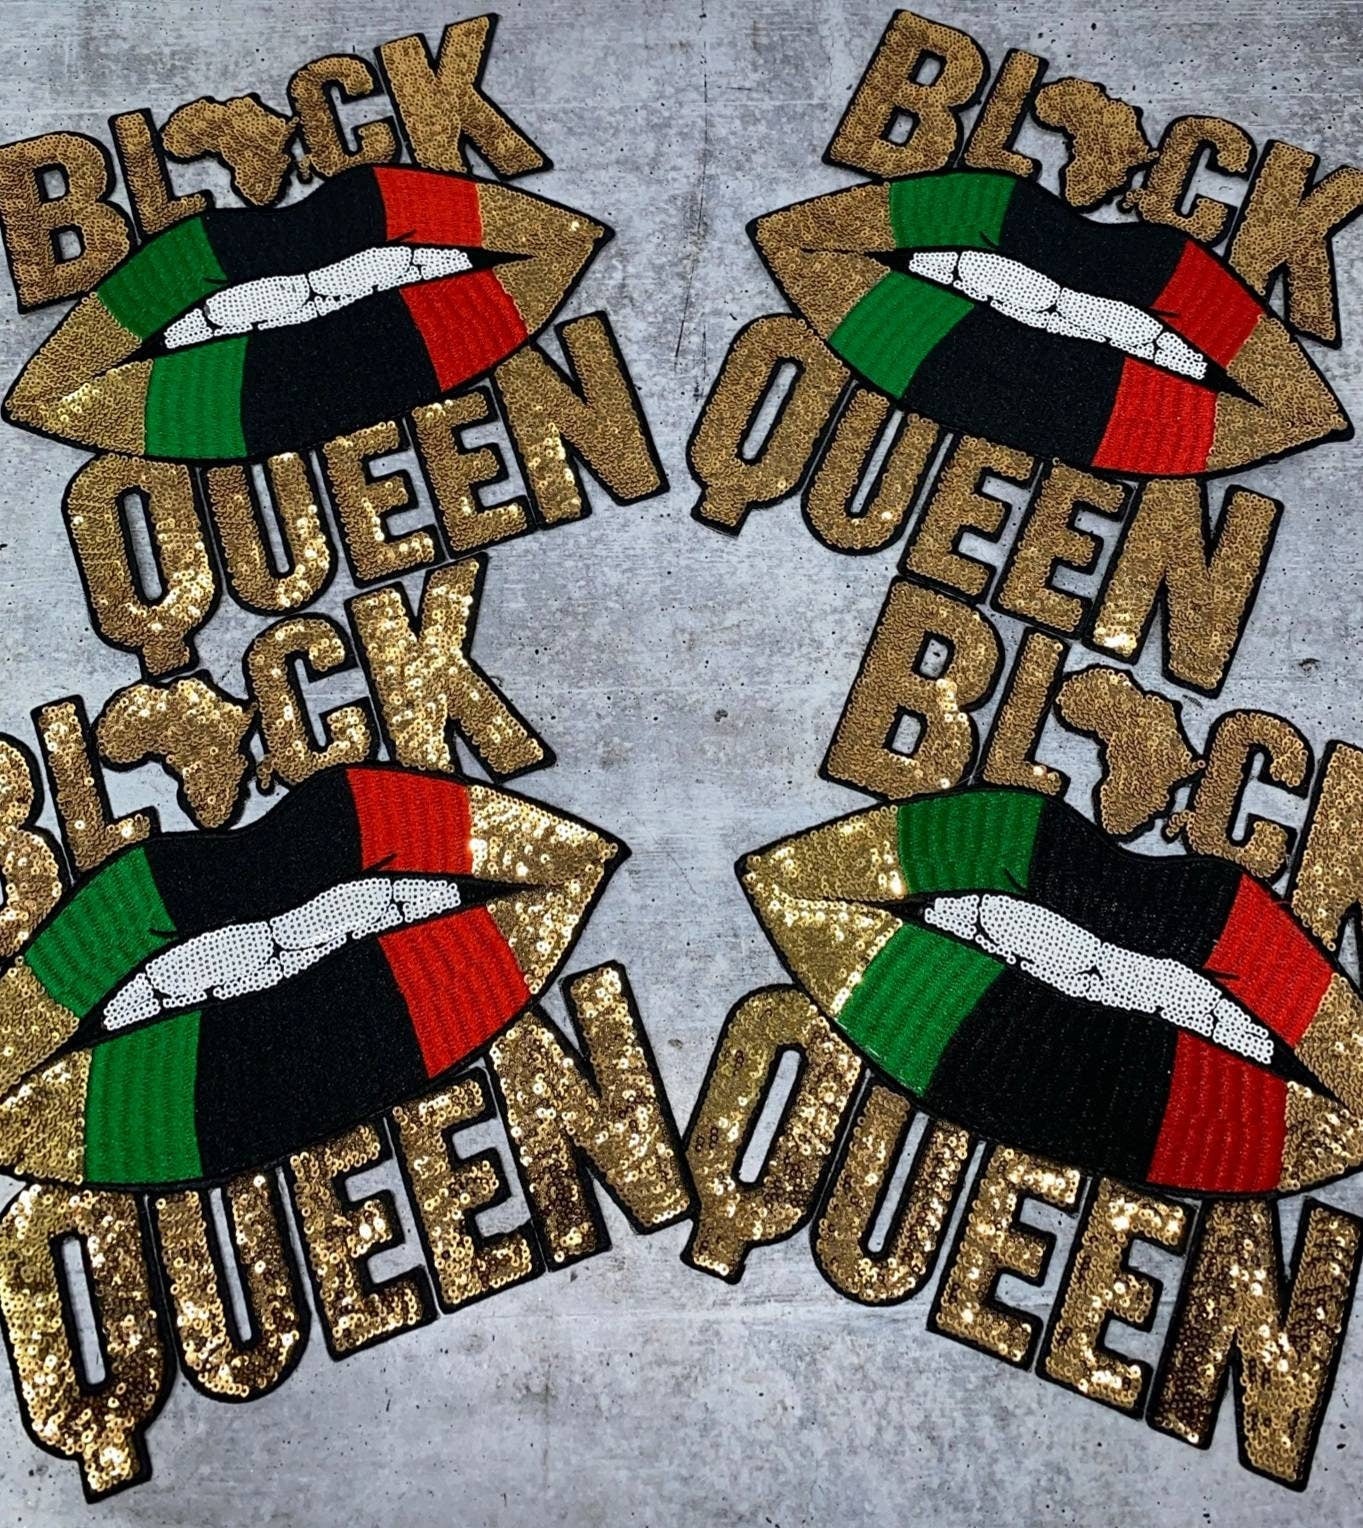 New, Sequins,"Black Queen" Gold/Green/Black/Red Lips, (iron-on) Size 10.5", LARGE Bling Patch for Denim Jacket, Shirts, Hoodies, and More